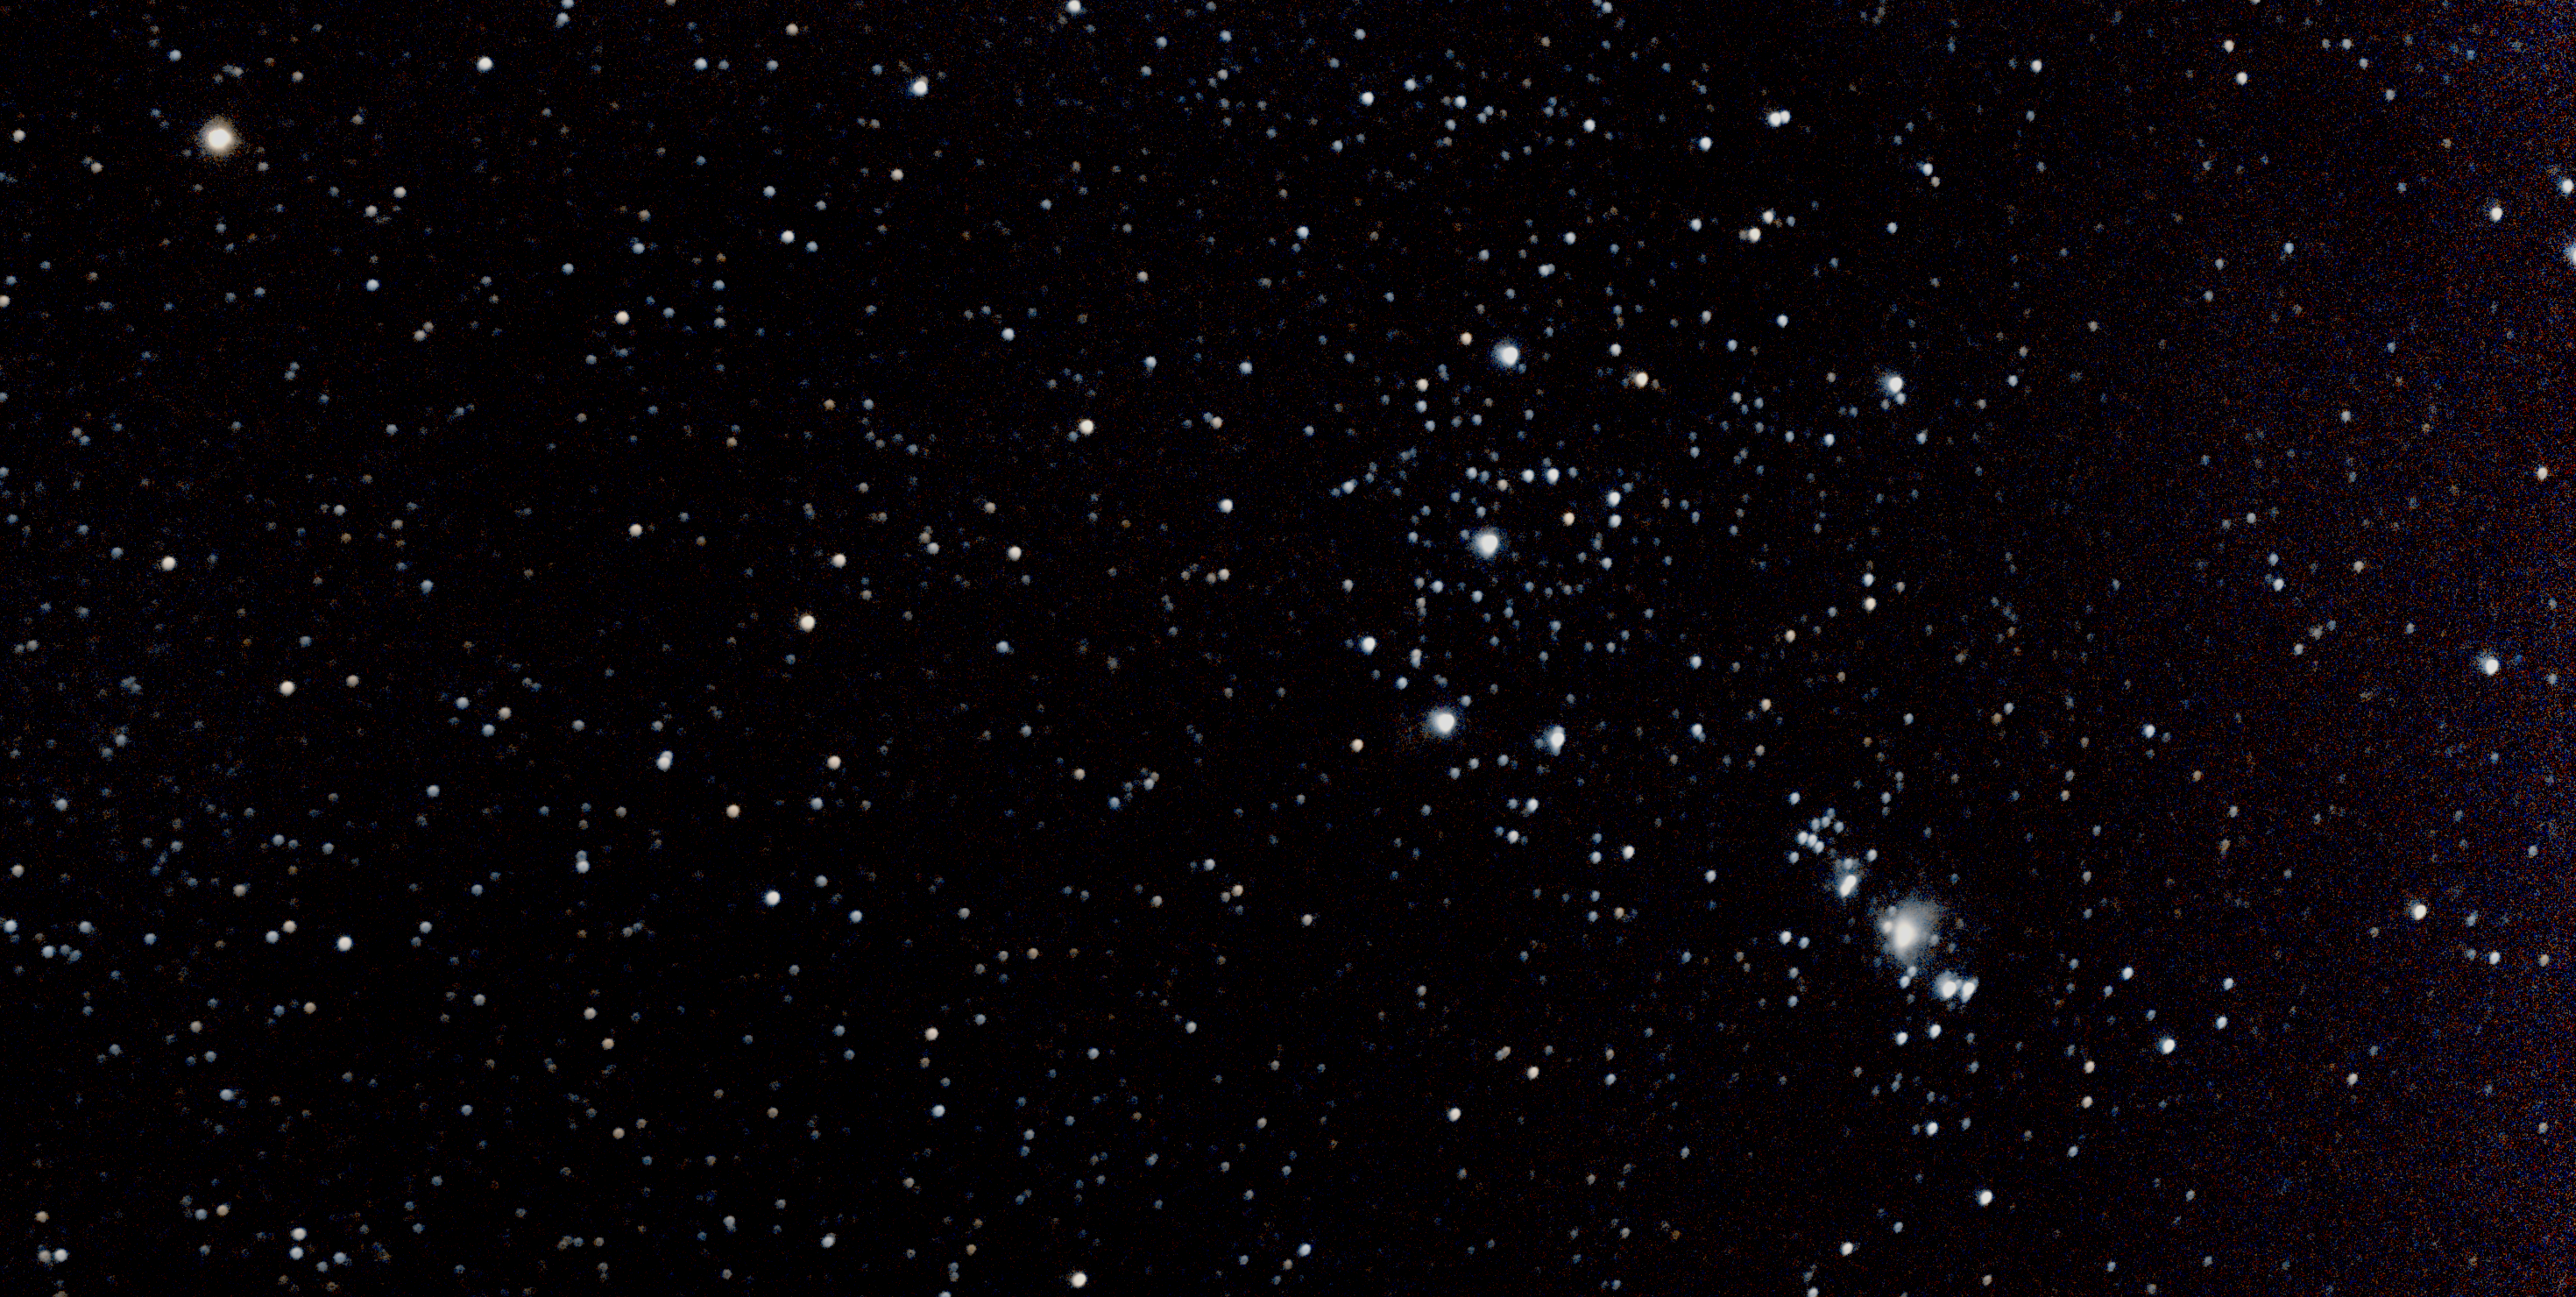 my attempt at photographing the orion nebula